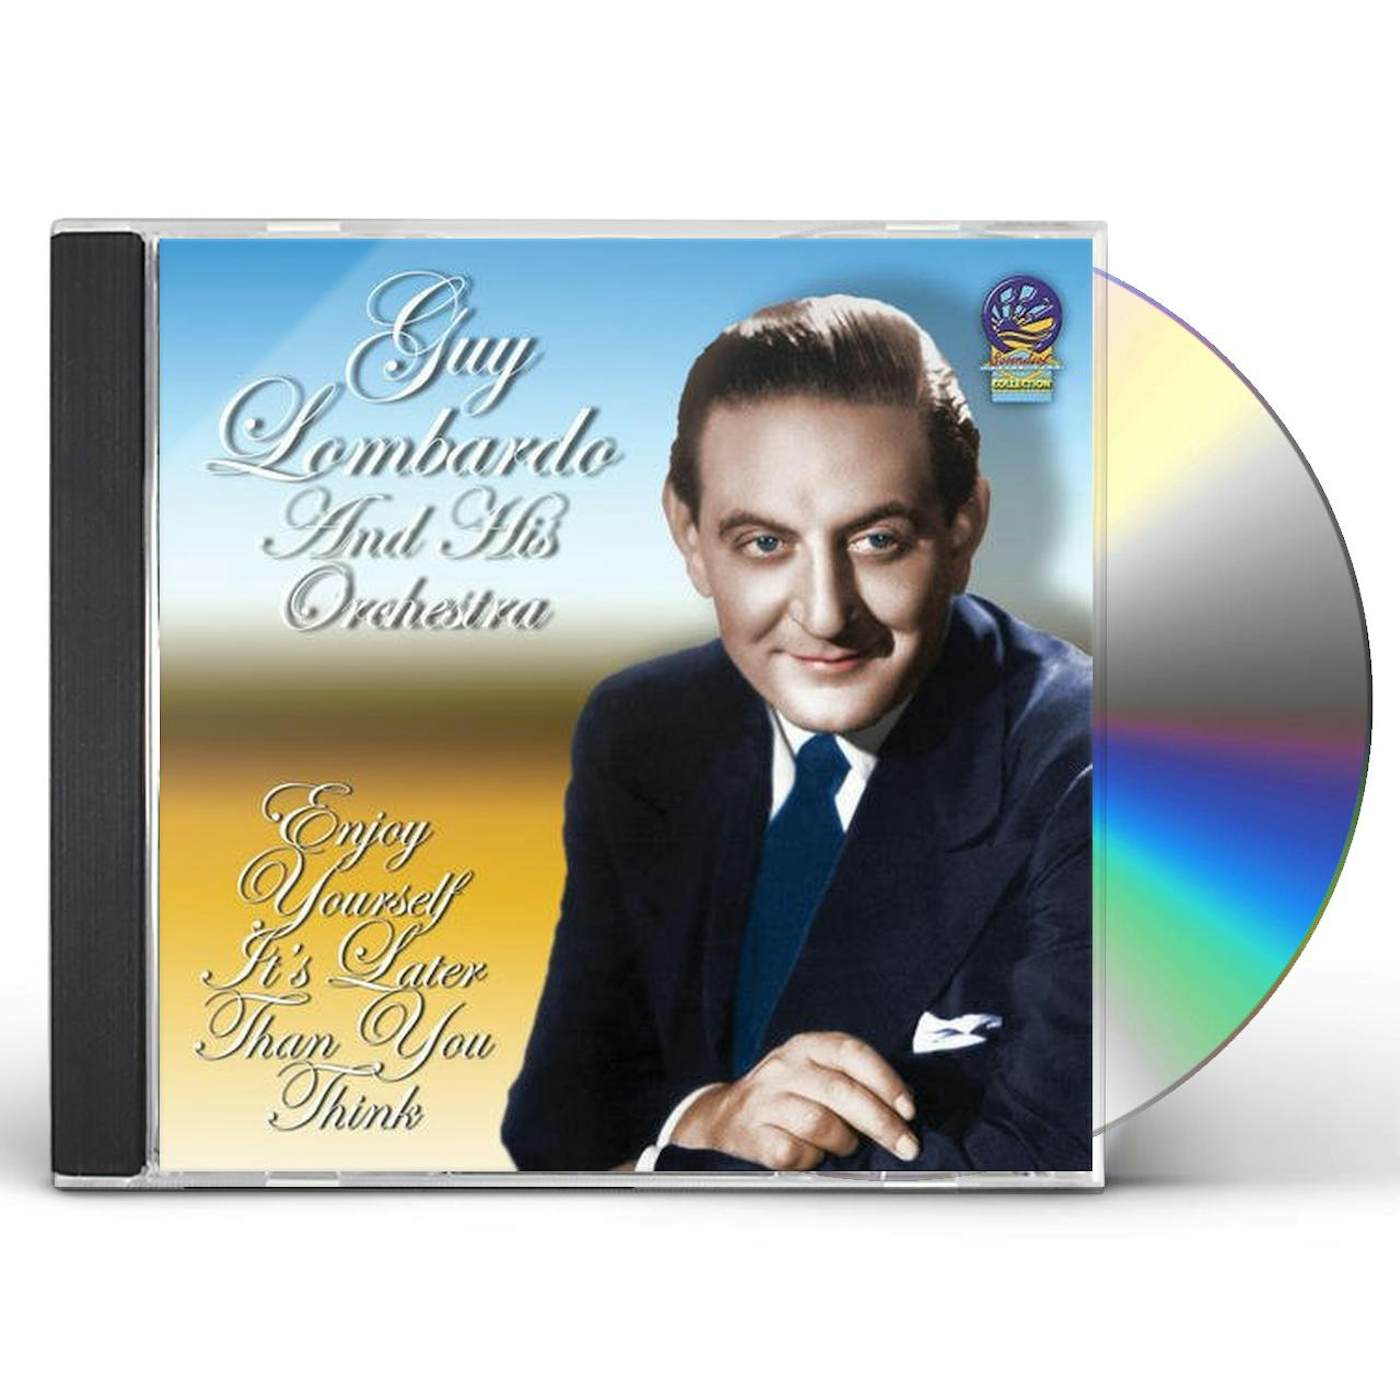 Guy Lombardo ENJOY YOURSELF IT'S LATER THAN YOU THINK CD